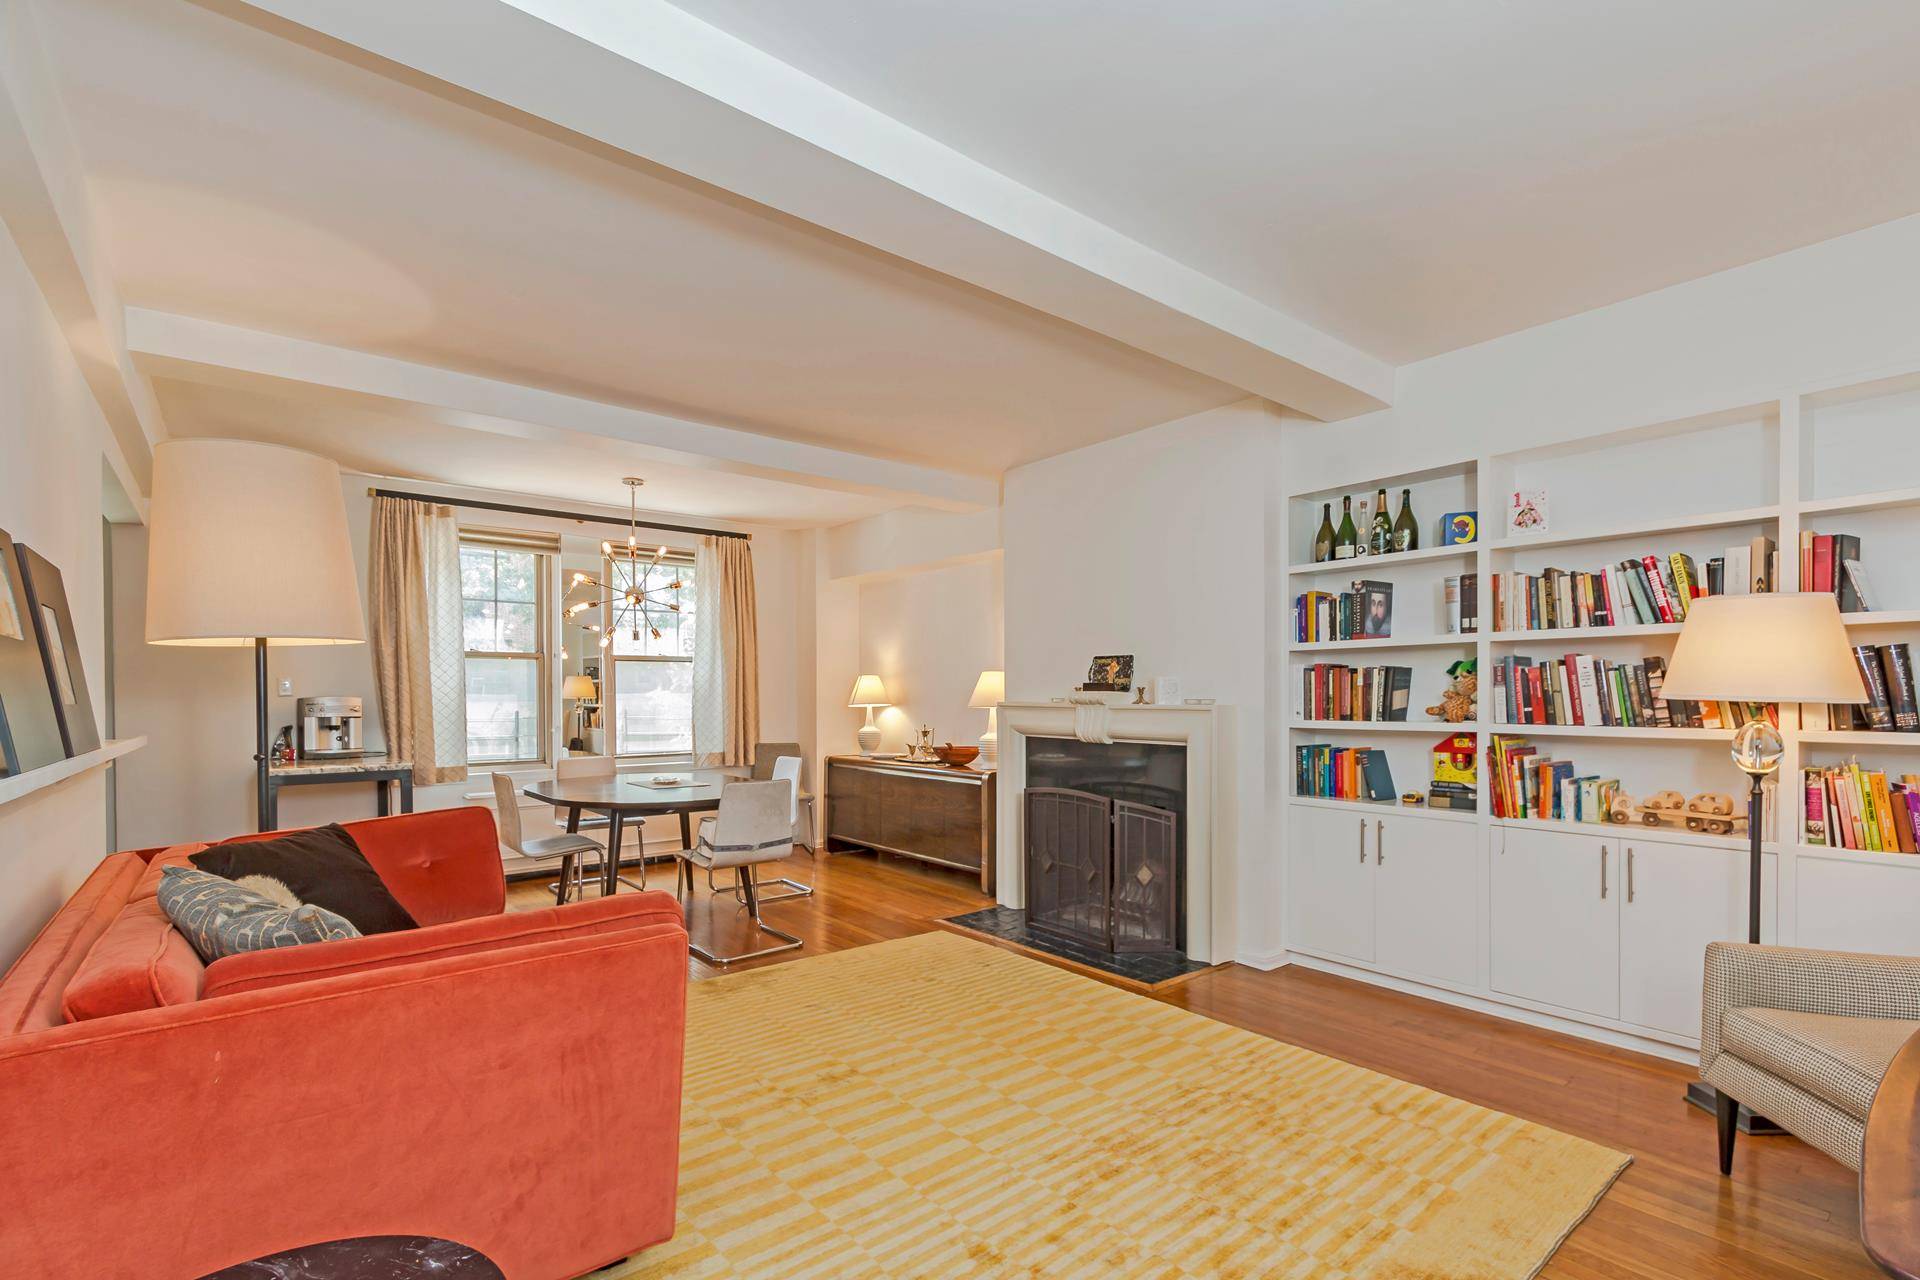 This beautiful Bing amp ; Bing 900 SF prewar condominium one bedroom home resides at 45 Christopher Street, a highly desired building located in the heart of the West Village.